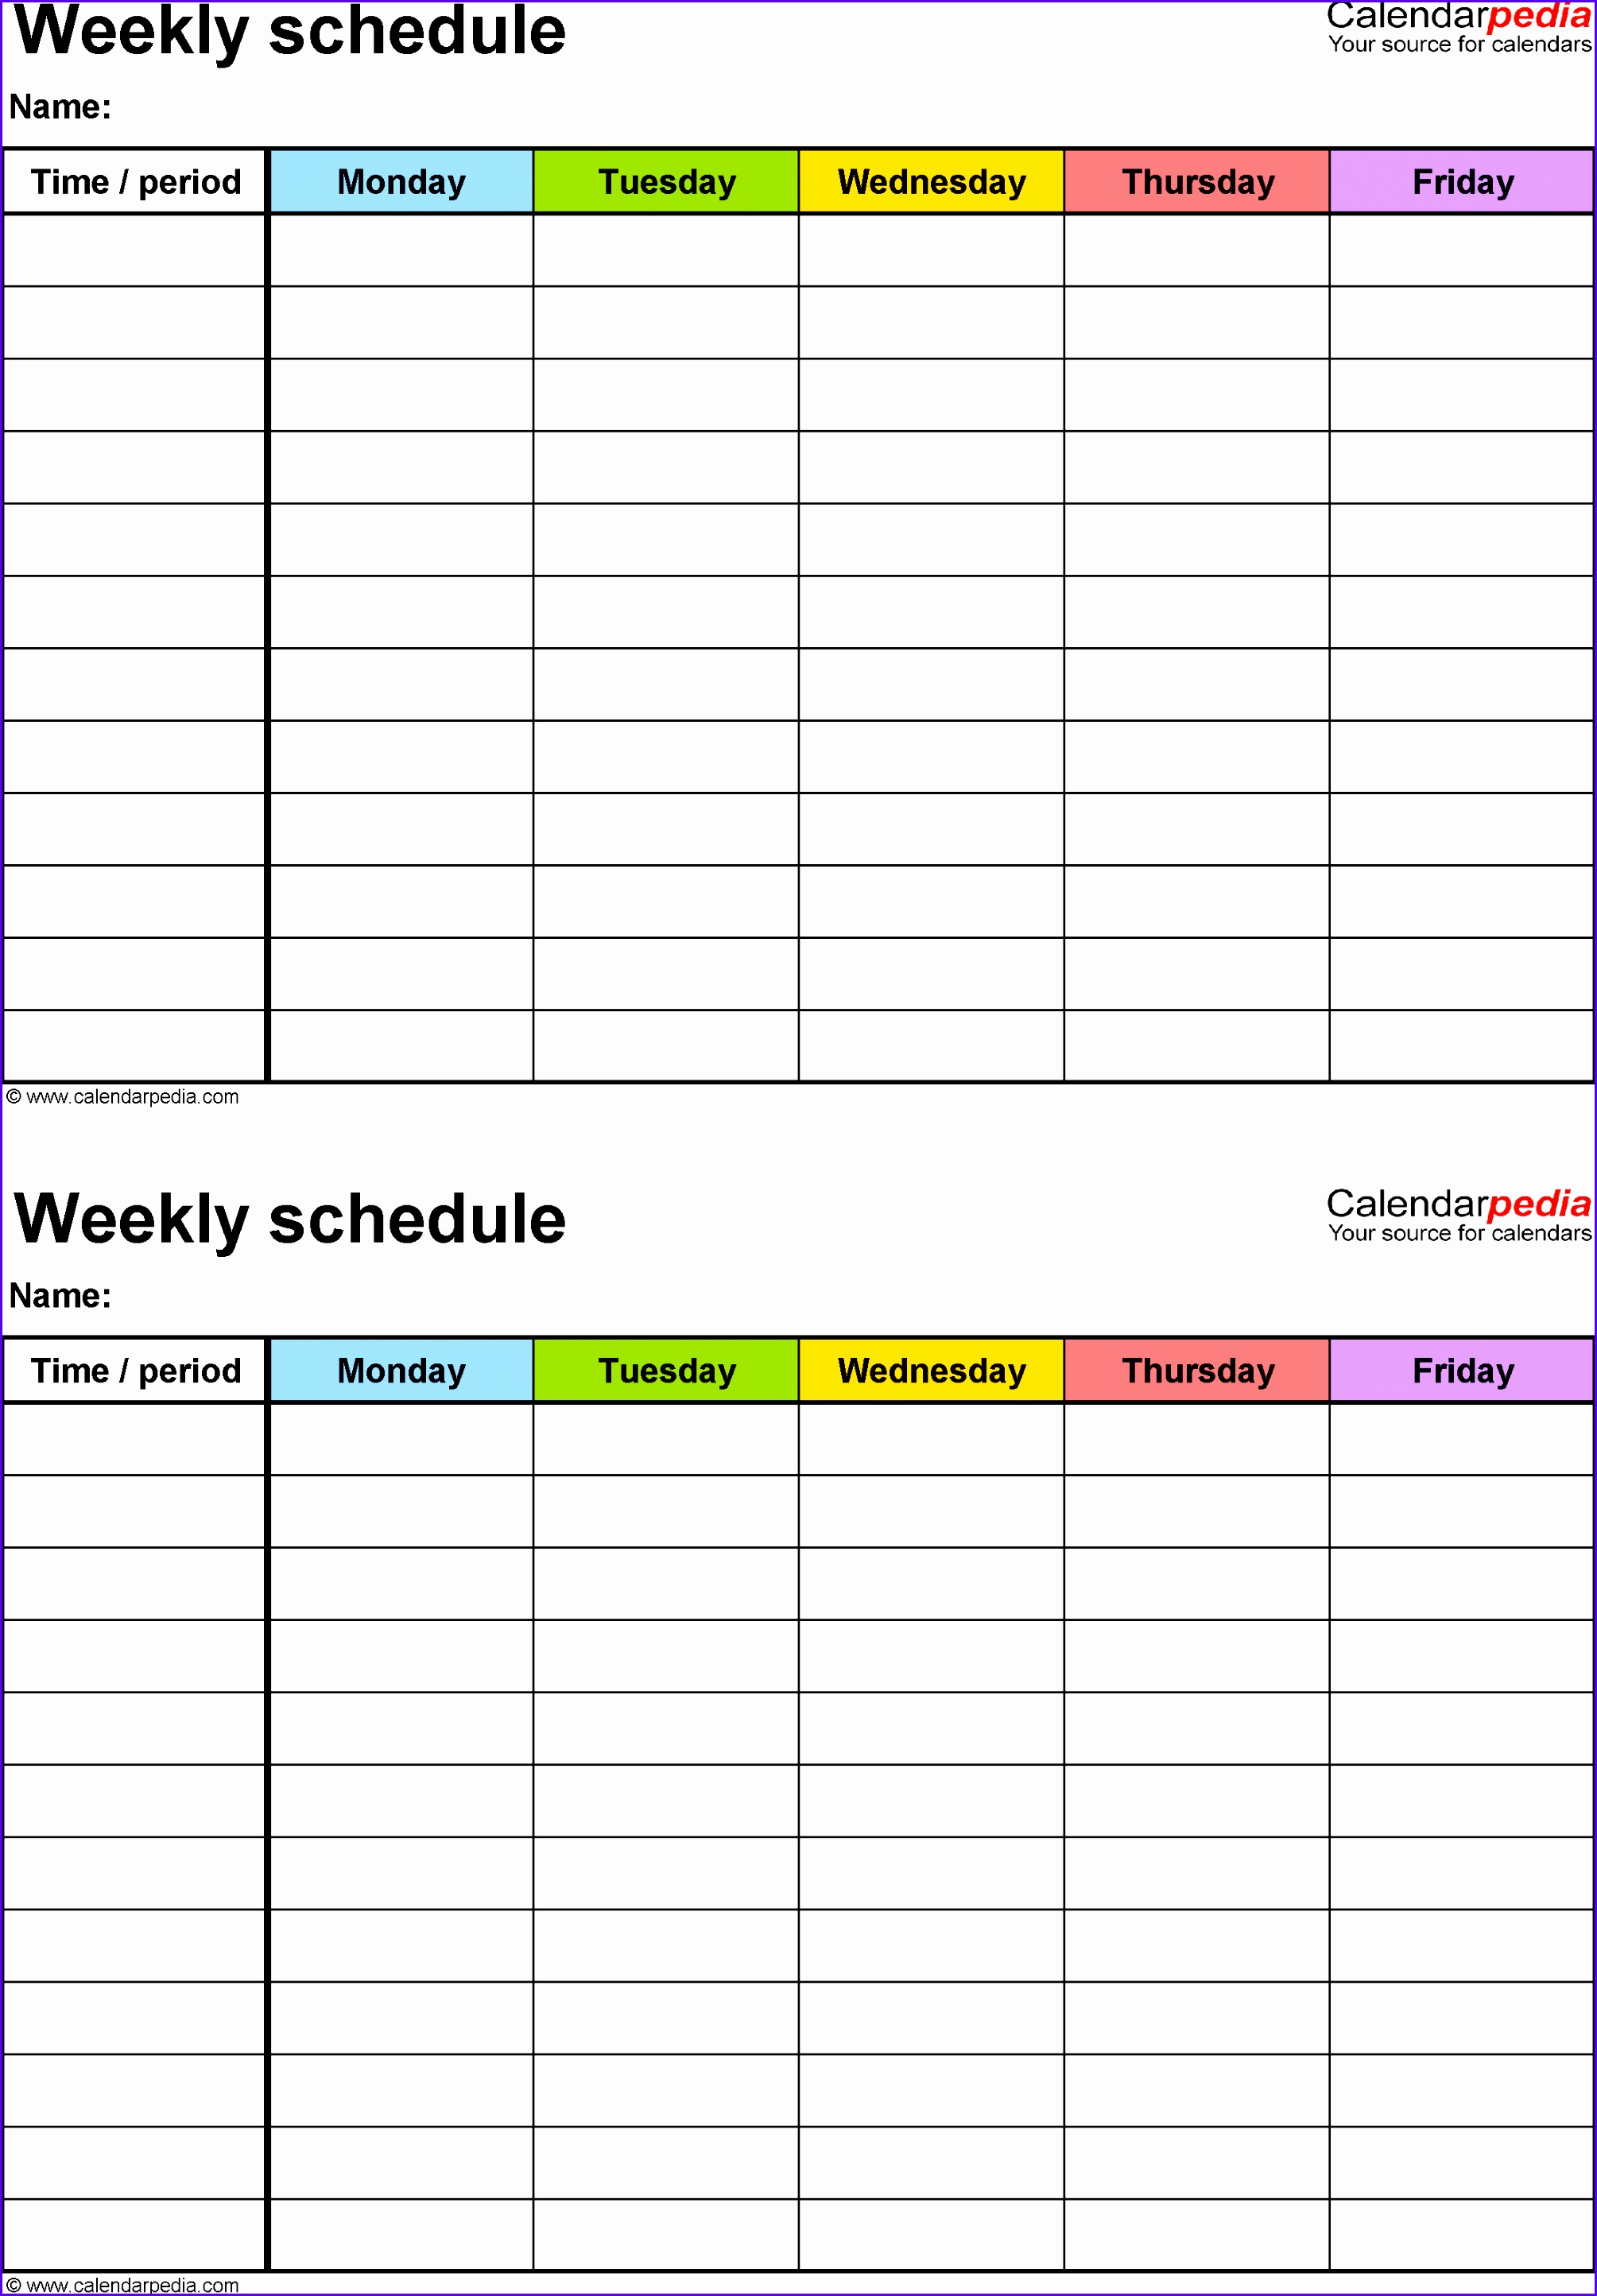 Weekly schedule template for Excel version 3 2 schedules on one page portrait 20092888